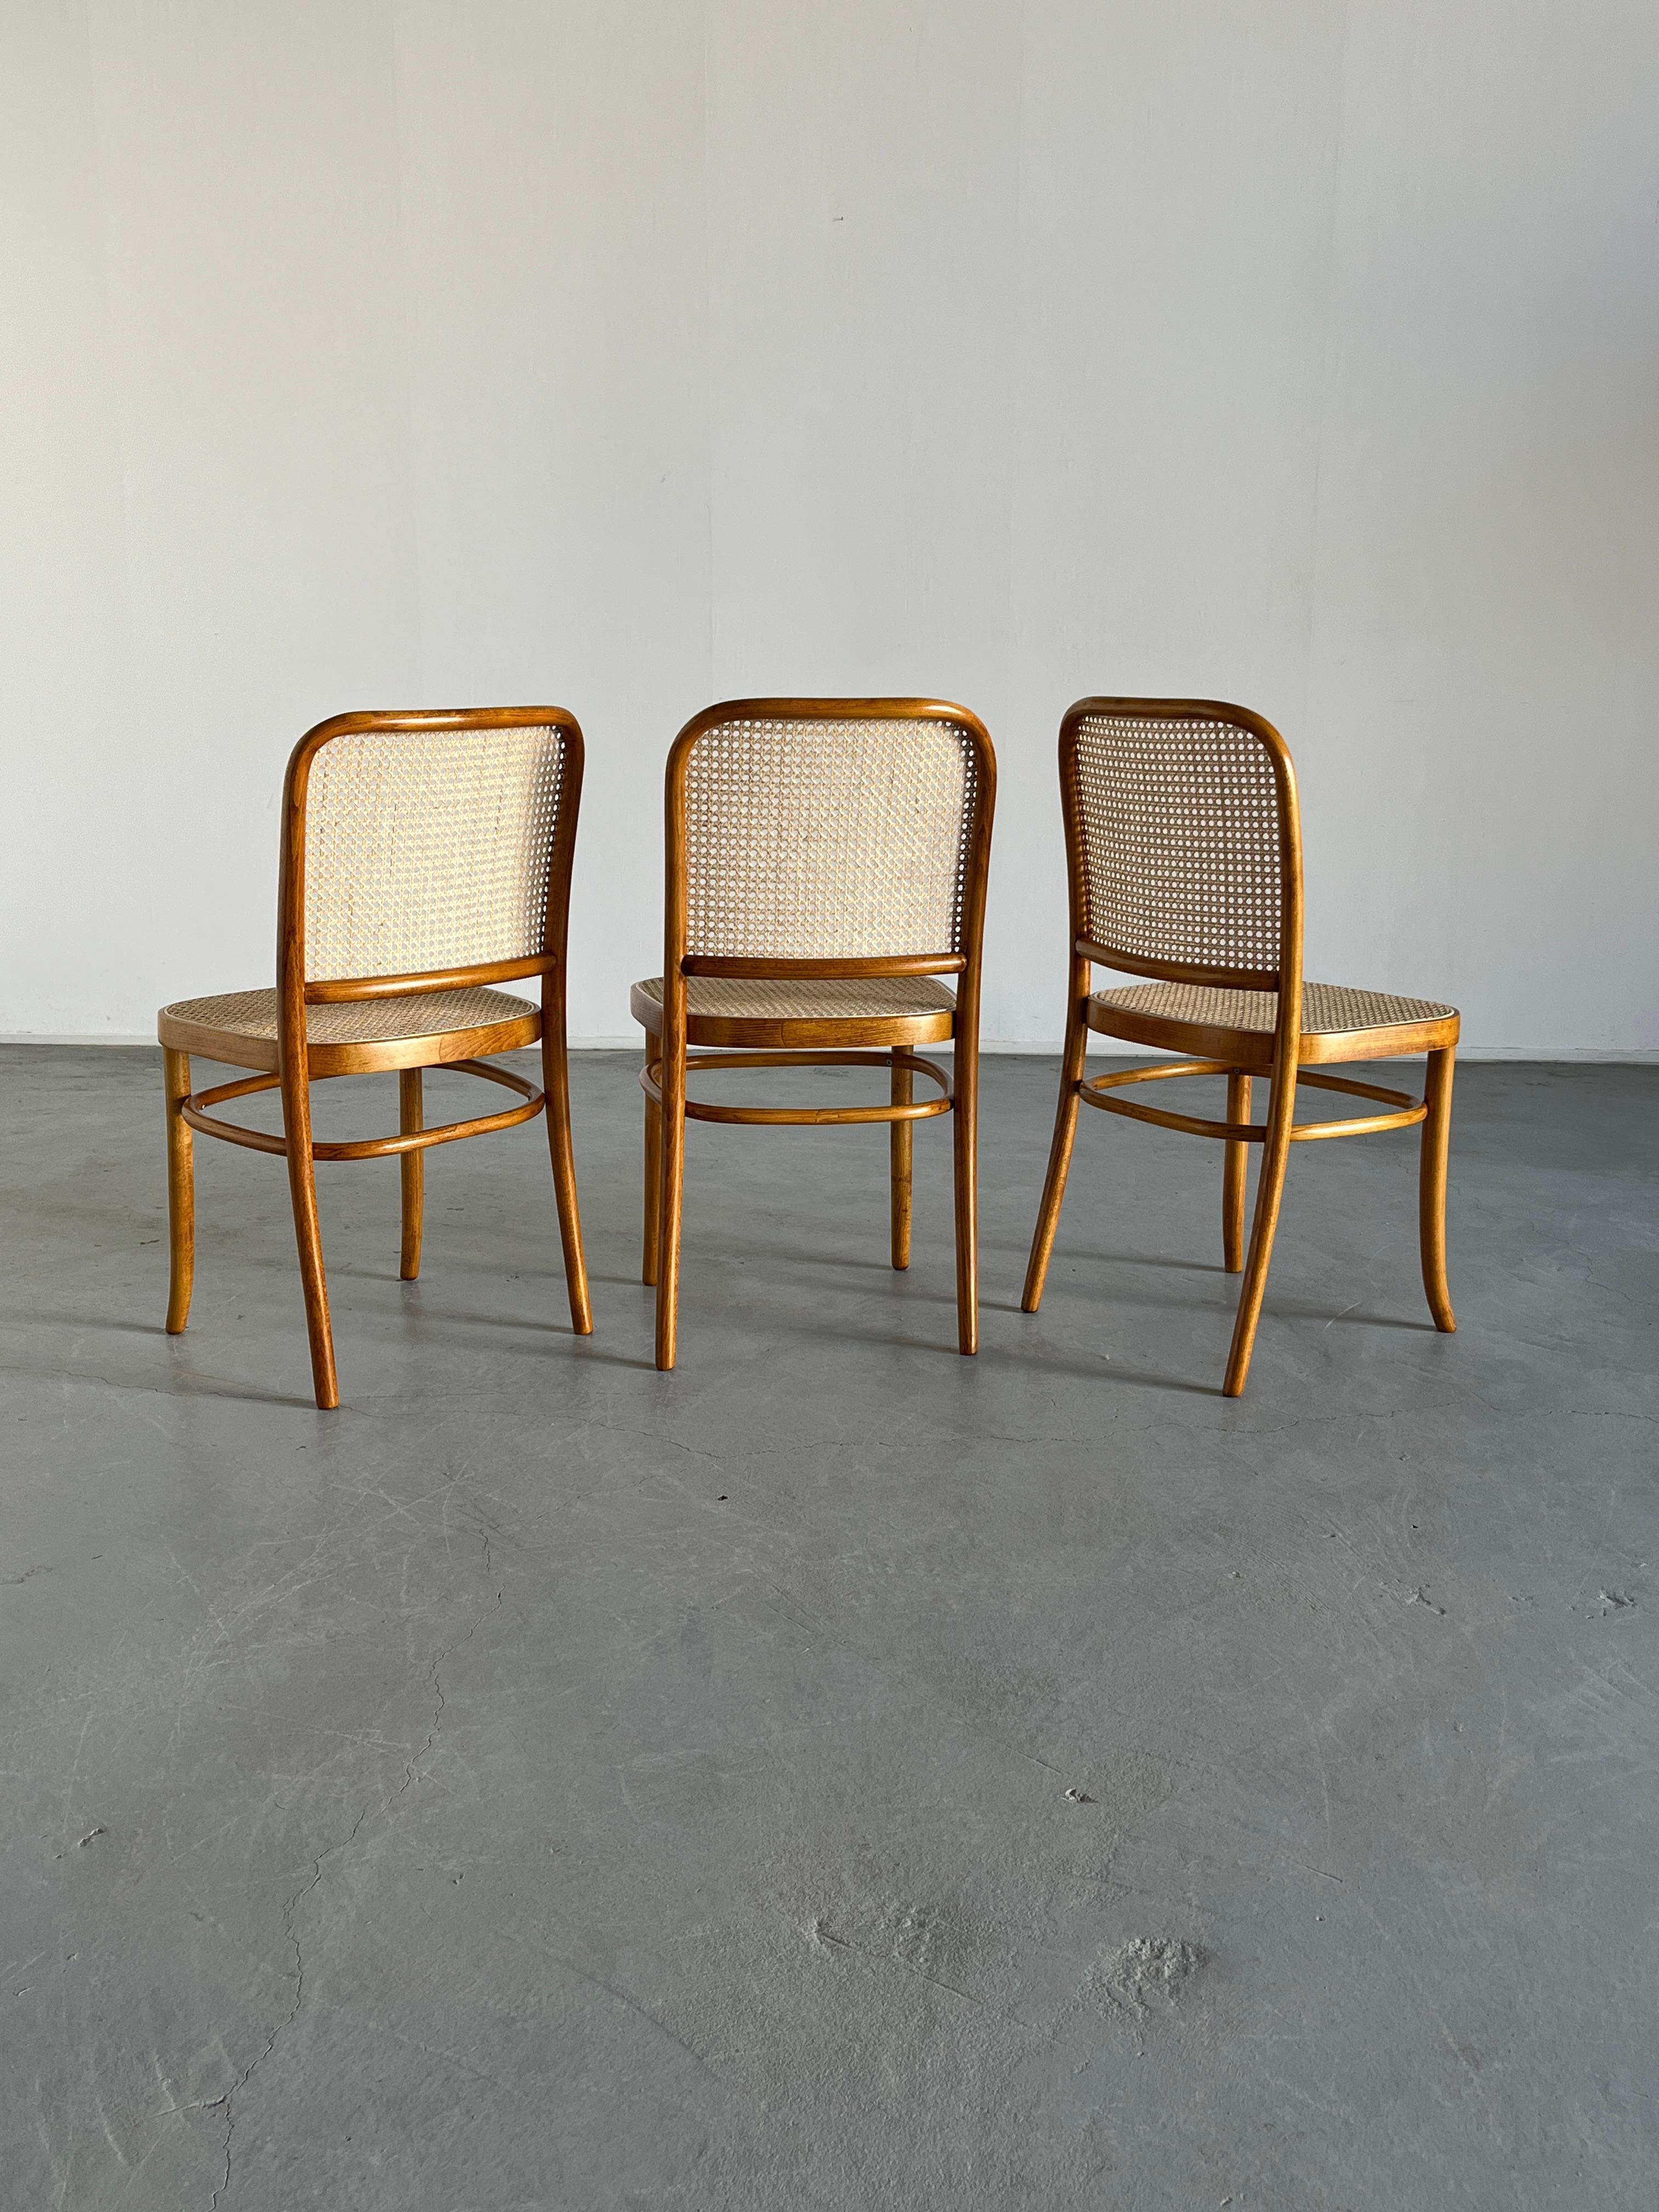 Late 20th Century 1 of 12 Vintage Thonet Bentwood Prague Chairs by Josef Hoffman, 1970s, Restored For Sale